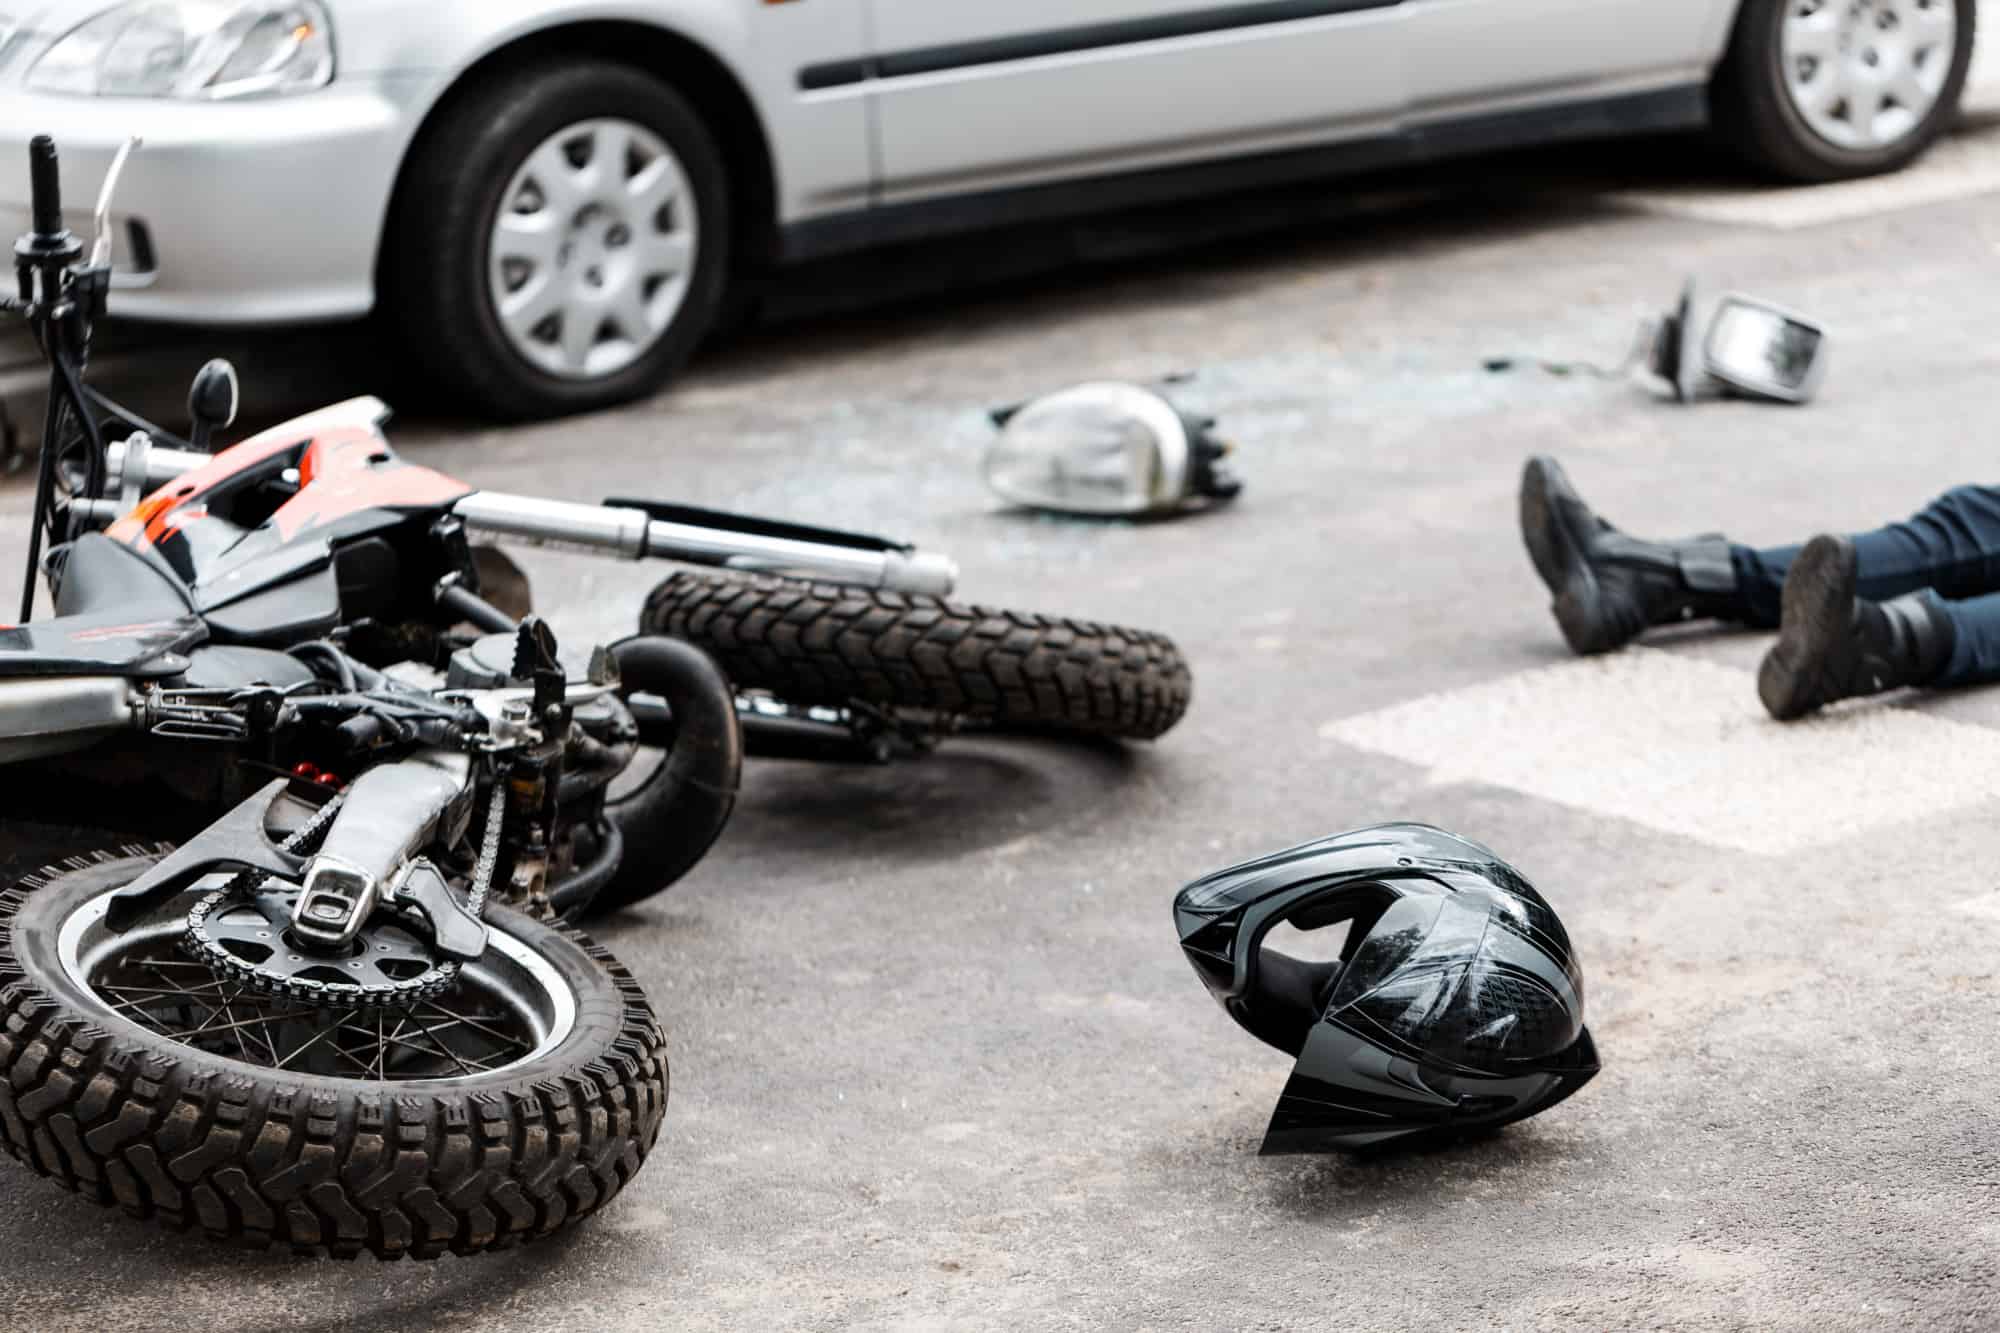 Injuries Reported in Motorcycle Crash near 22nd Street and S Craycroft Road [Tucson, AZ]